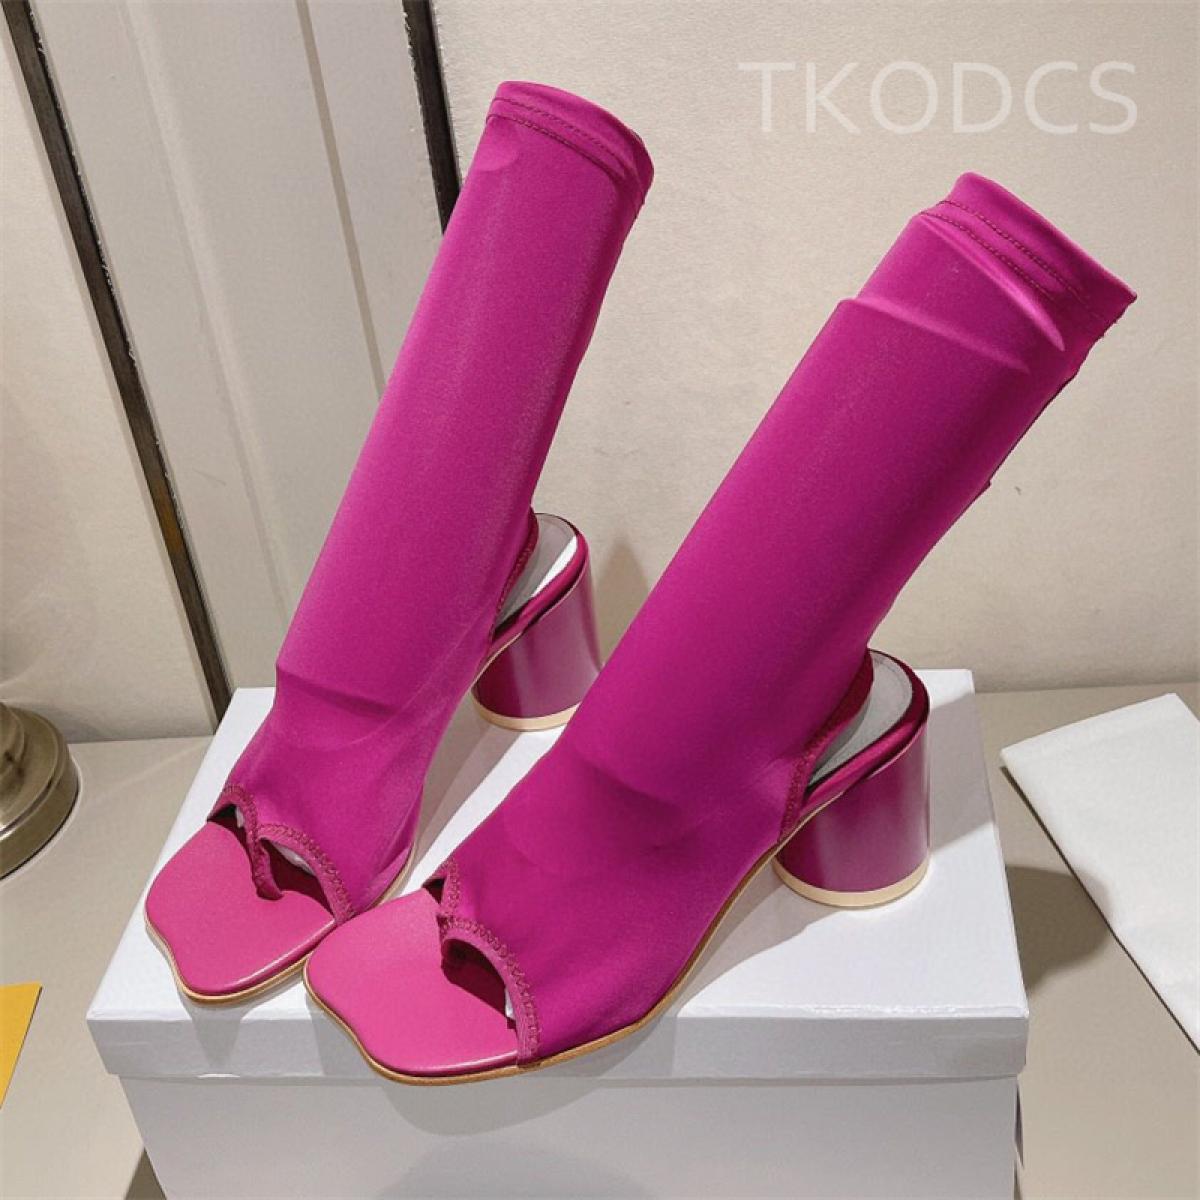 New Elastic Boots Women Split Toe Cool Boots Suede Holiday Party High Heel Sandals Summer High Heels Solid Color Boots F